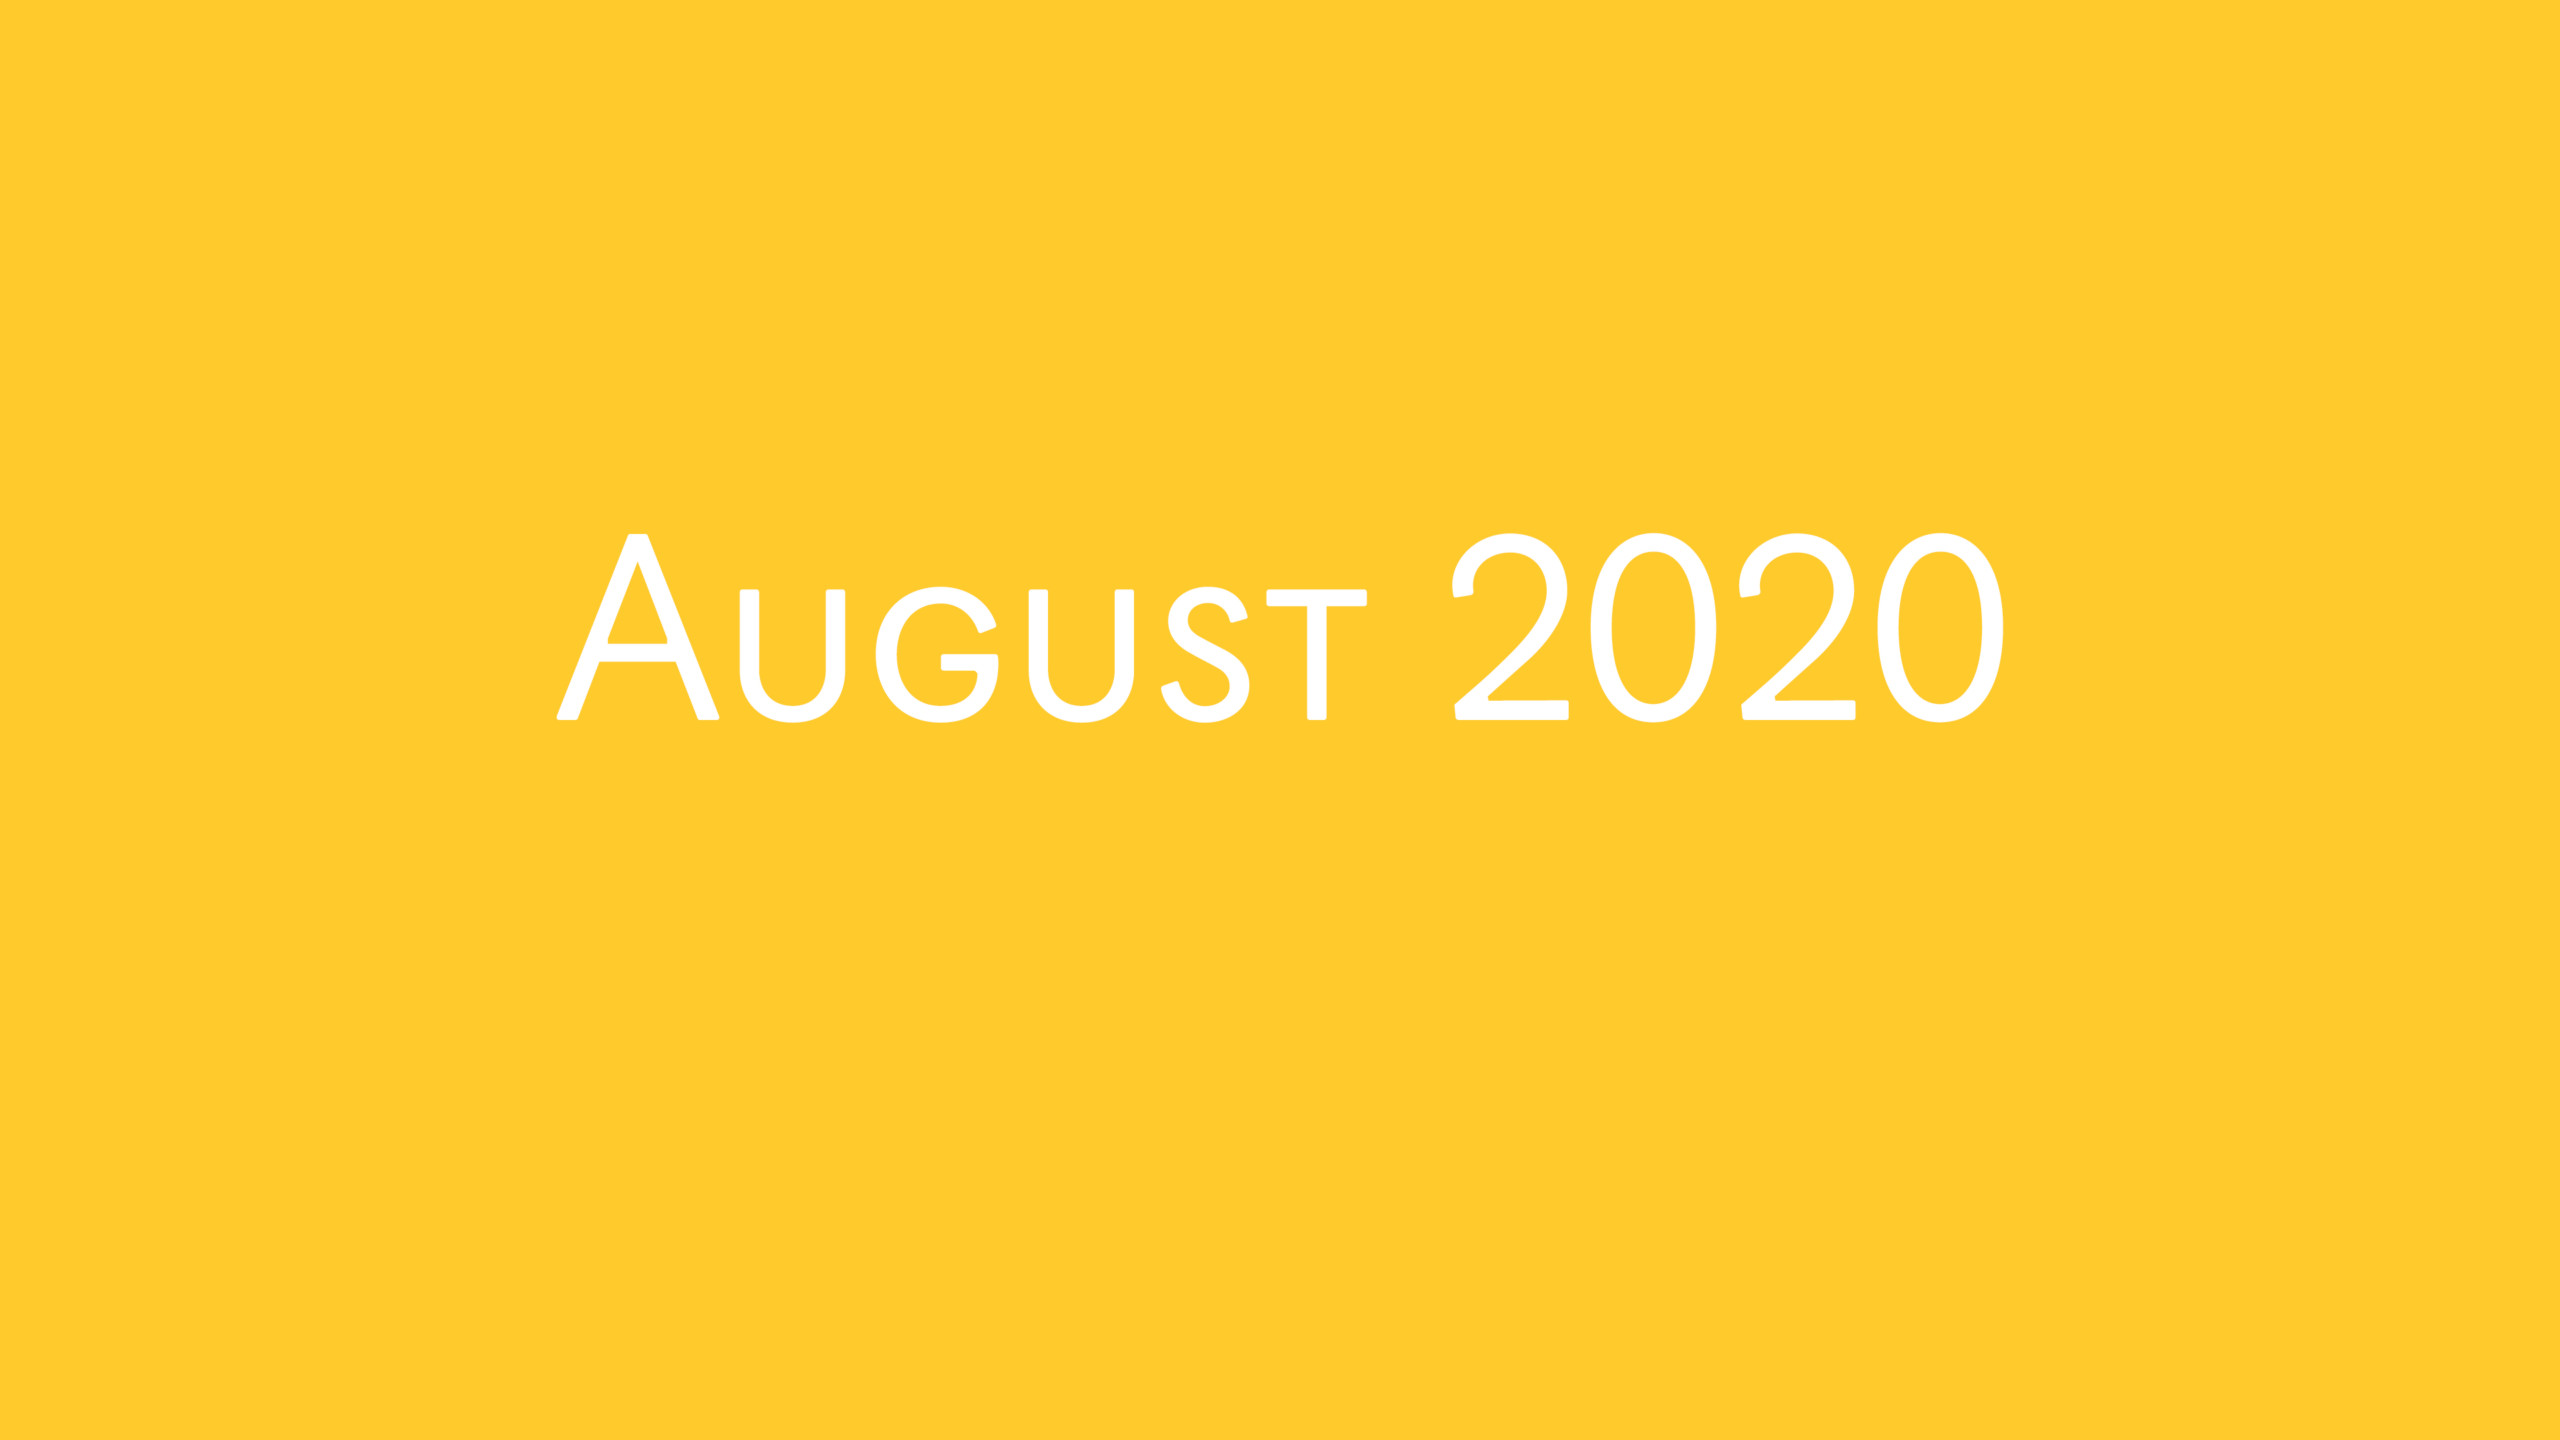 Veryfi's August 2020 Release Notes